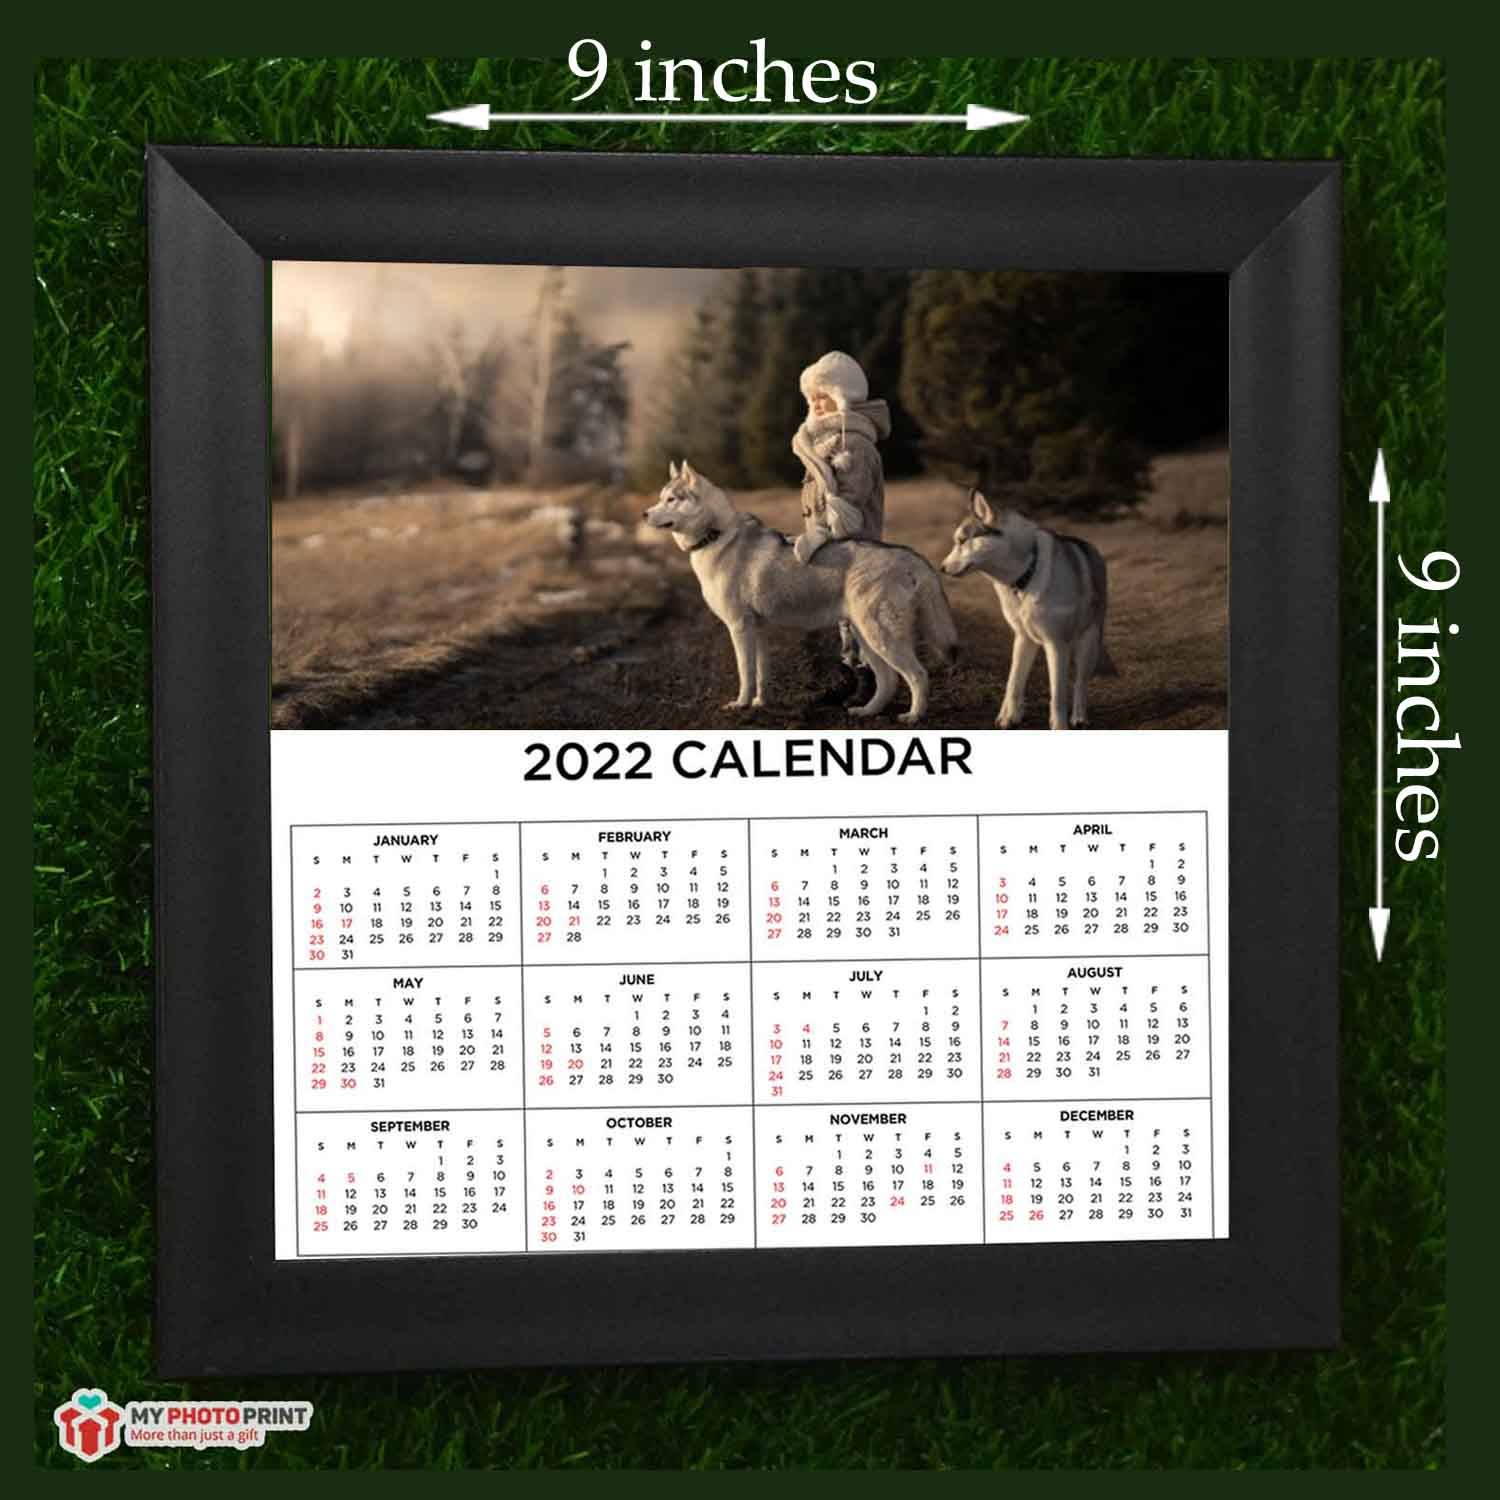 Personalized 2022 Calendar And Photo Frame#2004